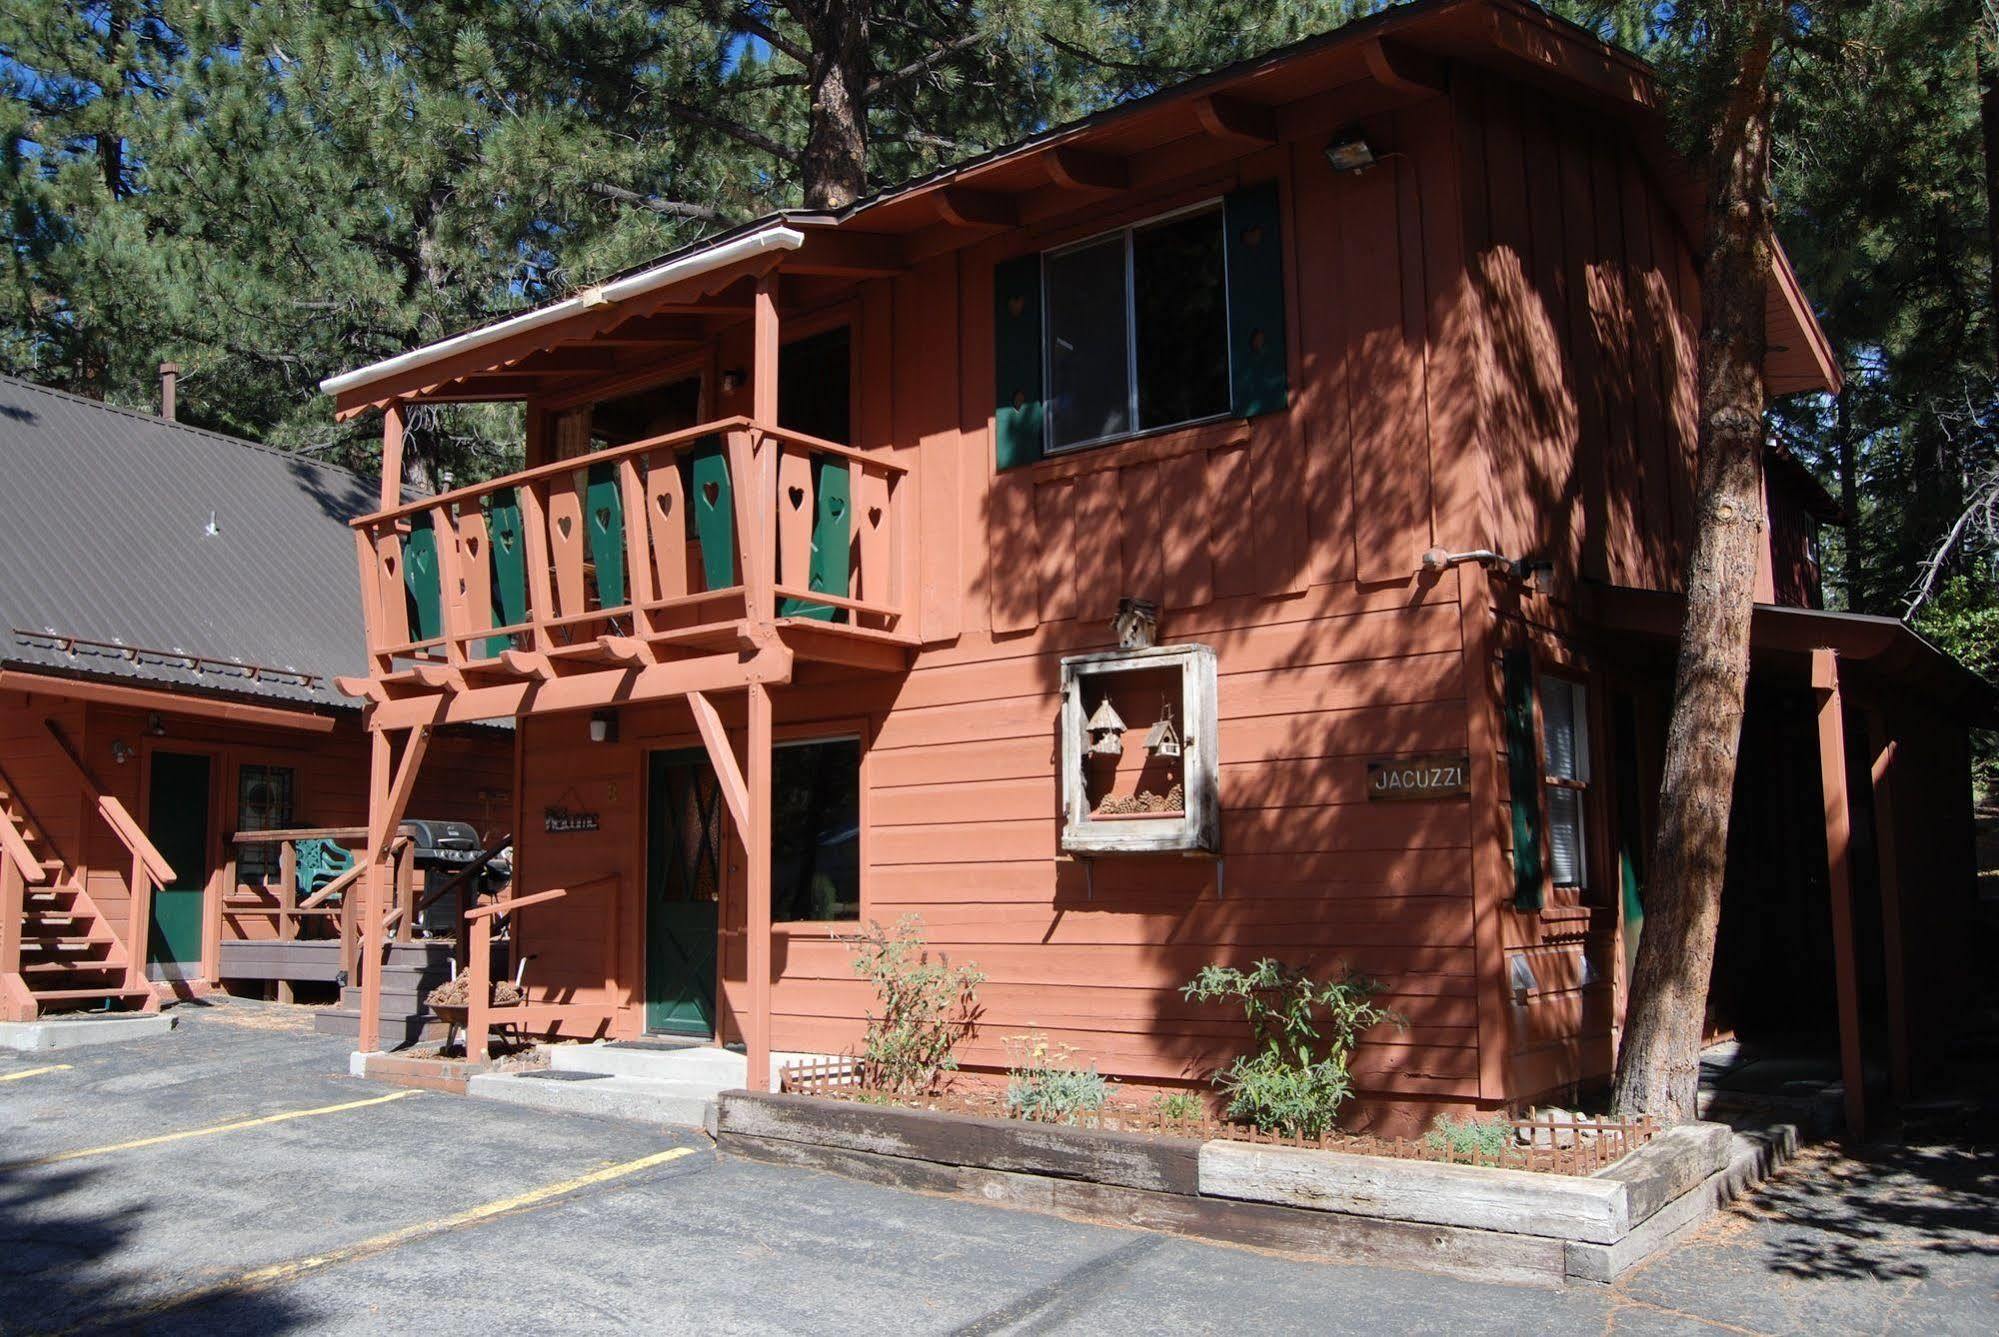 Edelweiss Lodge Mammoth Lakes Exterior photo